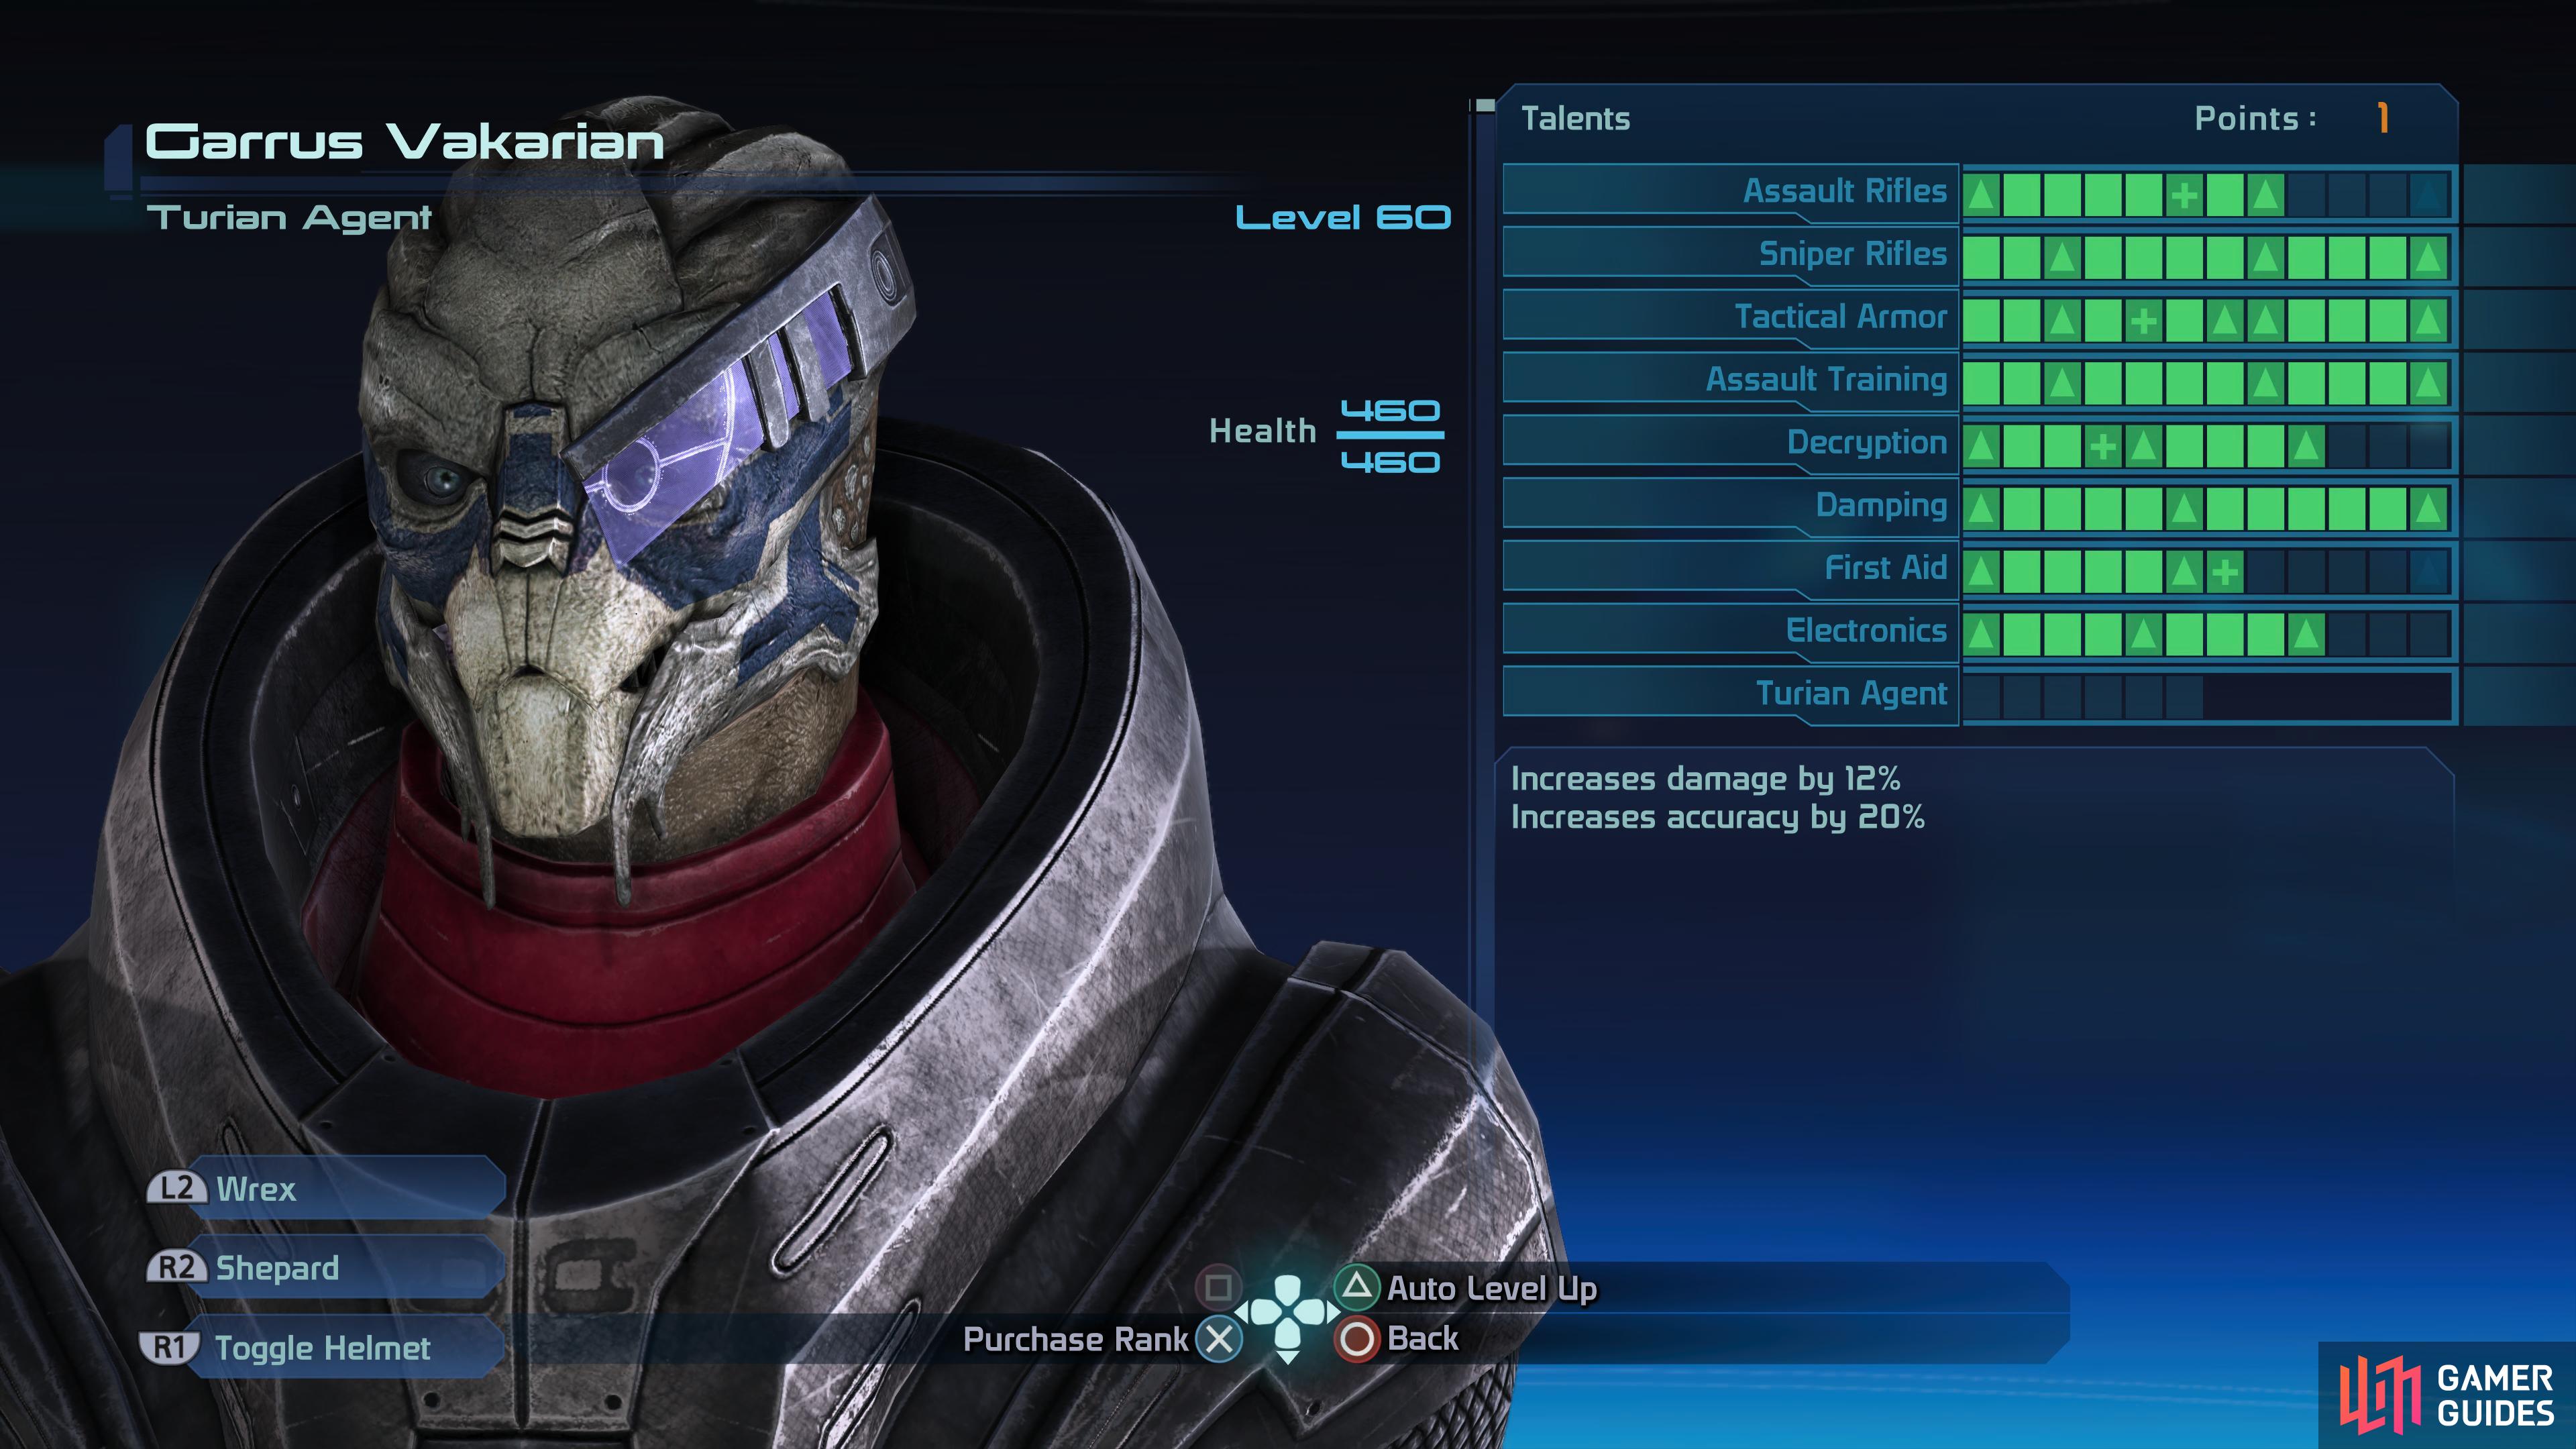 Suggested talent point allocation for Garrus.